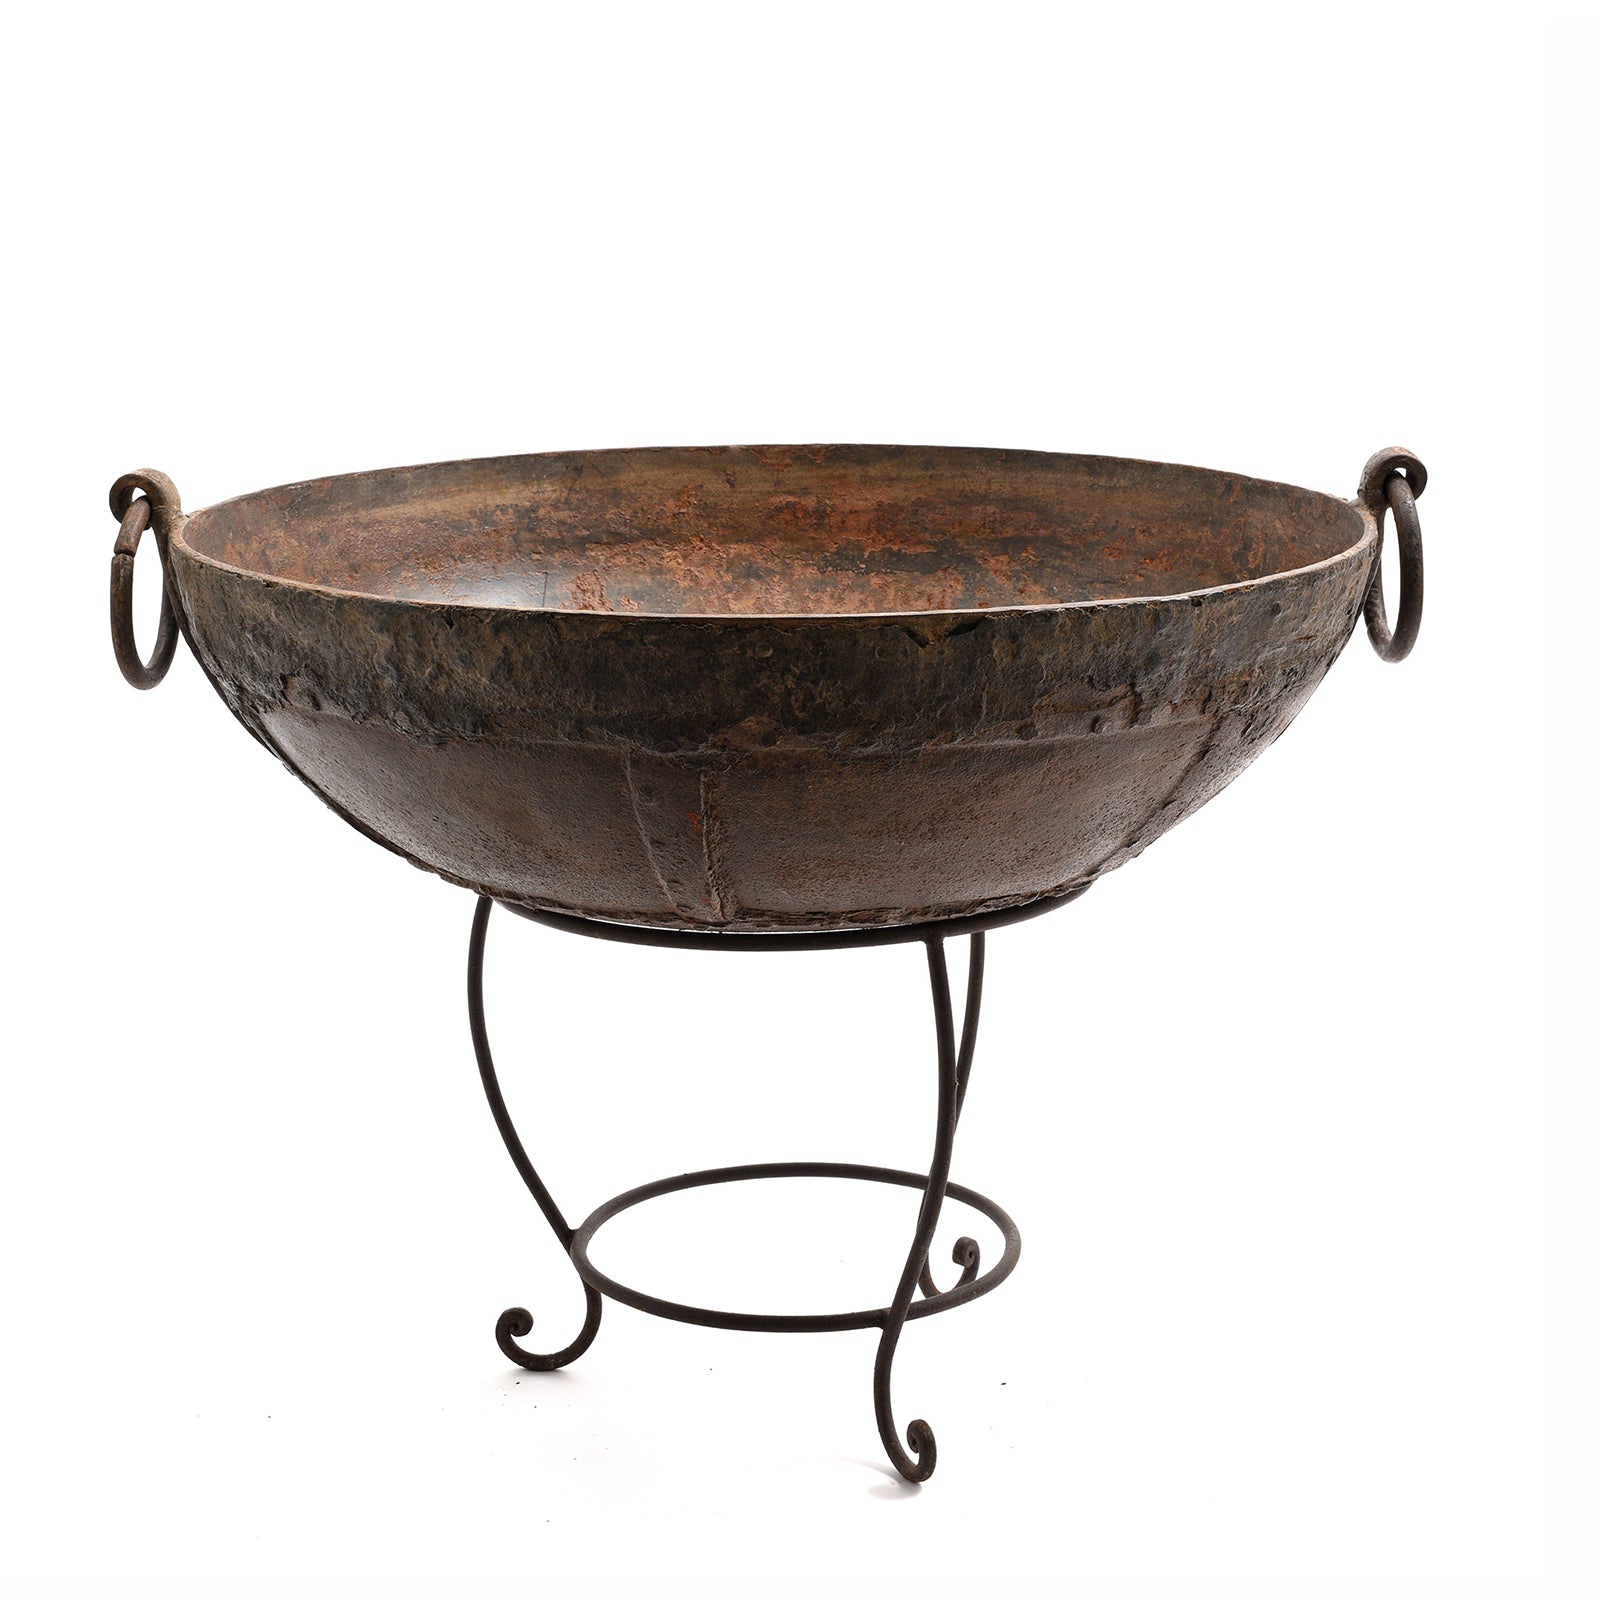 Old 'Kadai' - Indian Fire Bowl On Stand From Rajasthan - Ca 1900 | Indigo Antiques